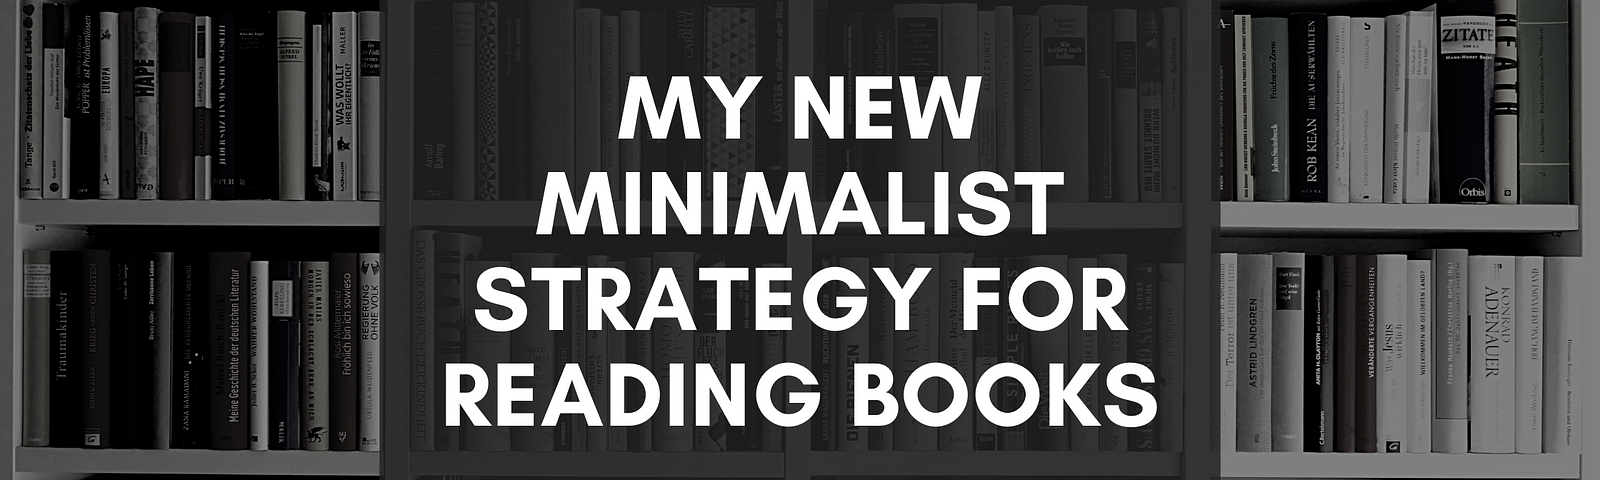 My New Minimalist Strategy for Reading Books